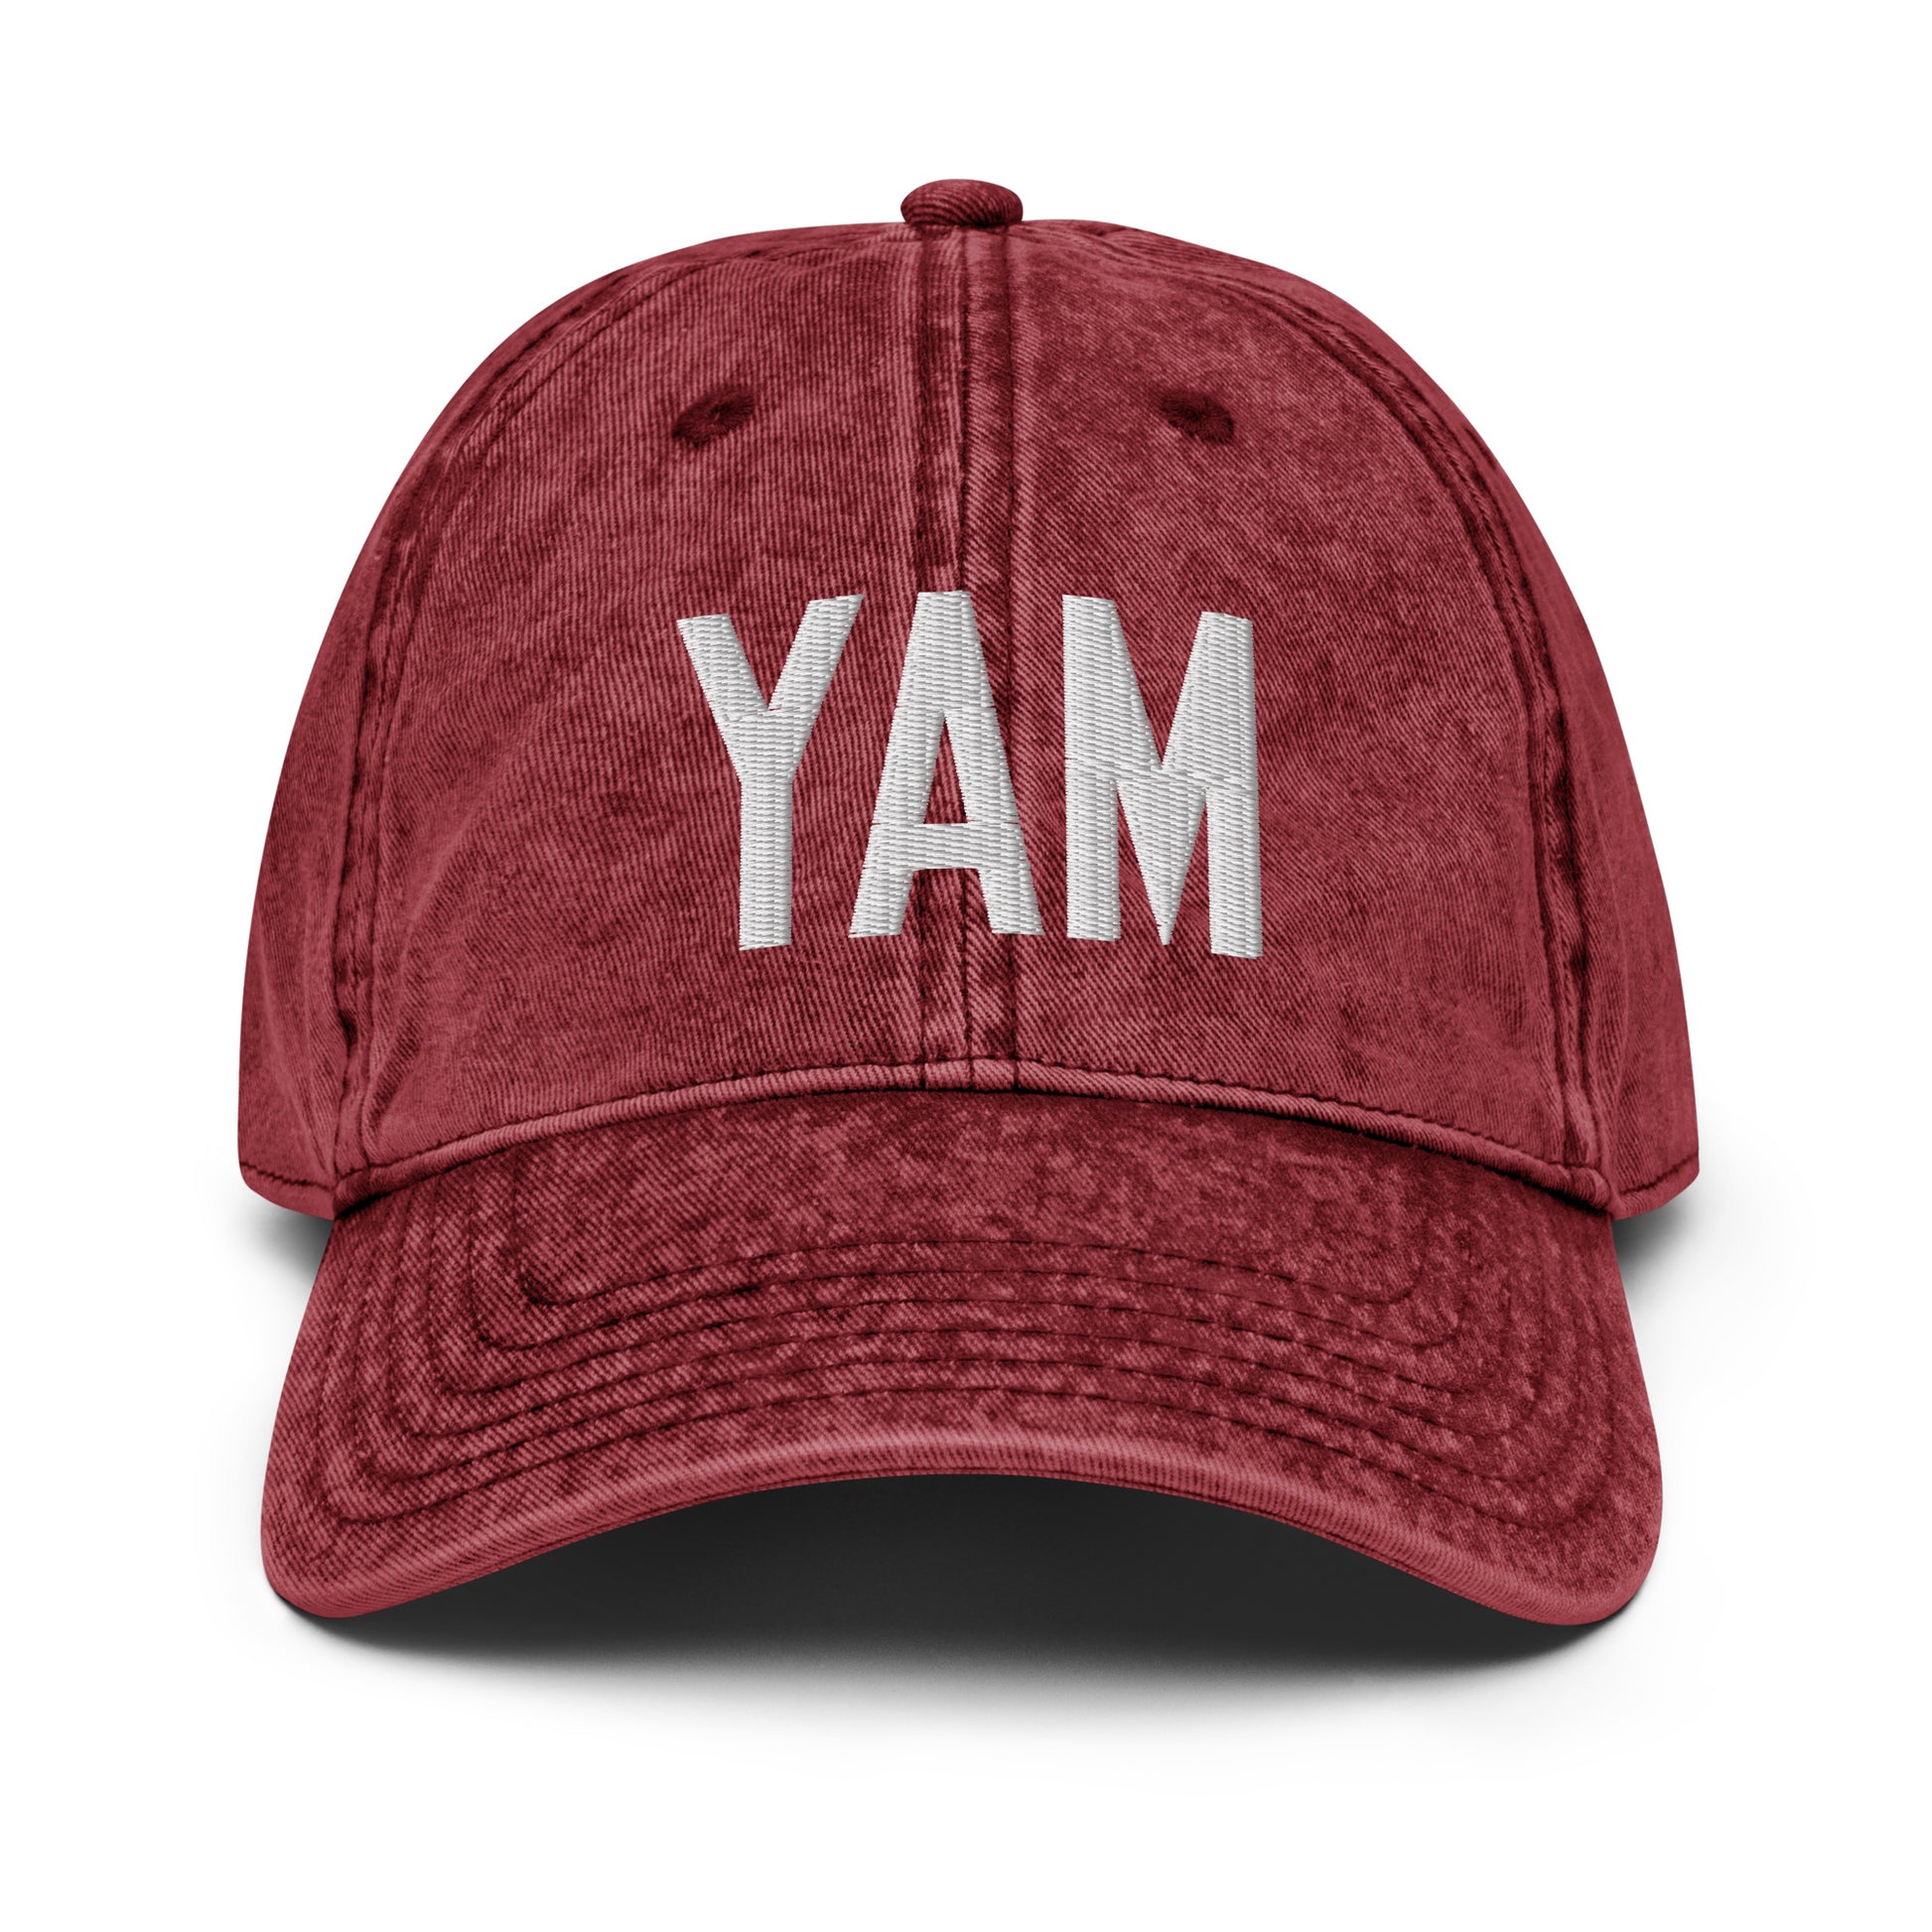 Airport Code Twill Cap - White • YAM Sault-Ste-Marie • YHM Designs - Image 19